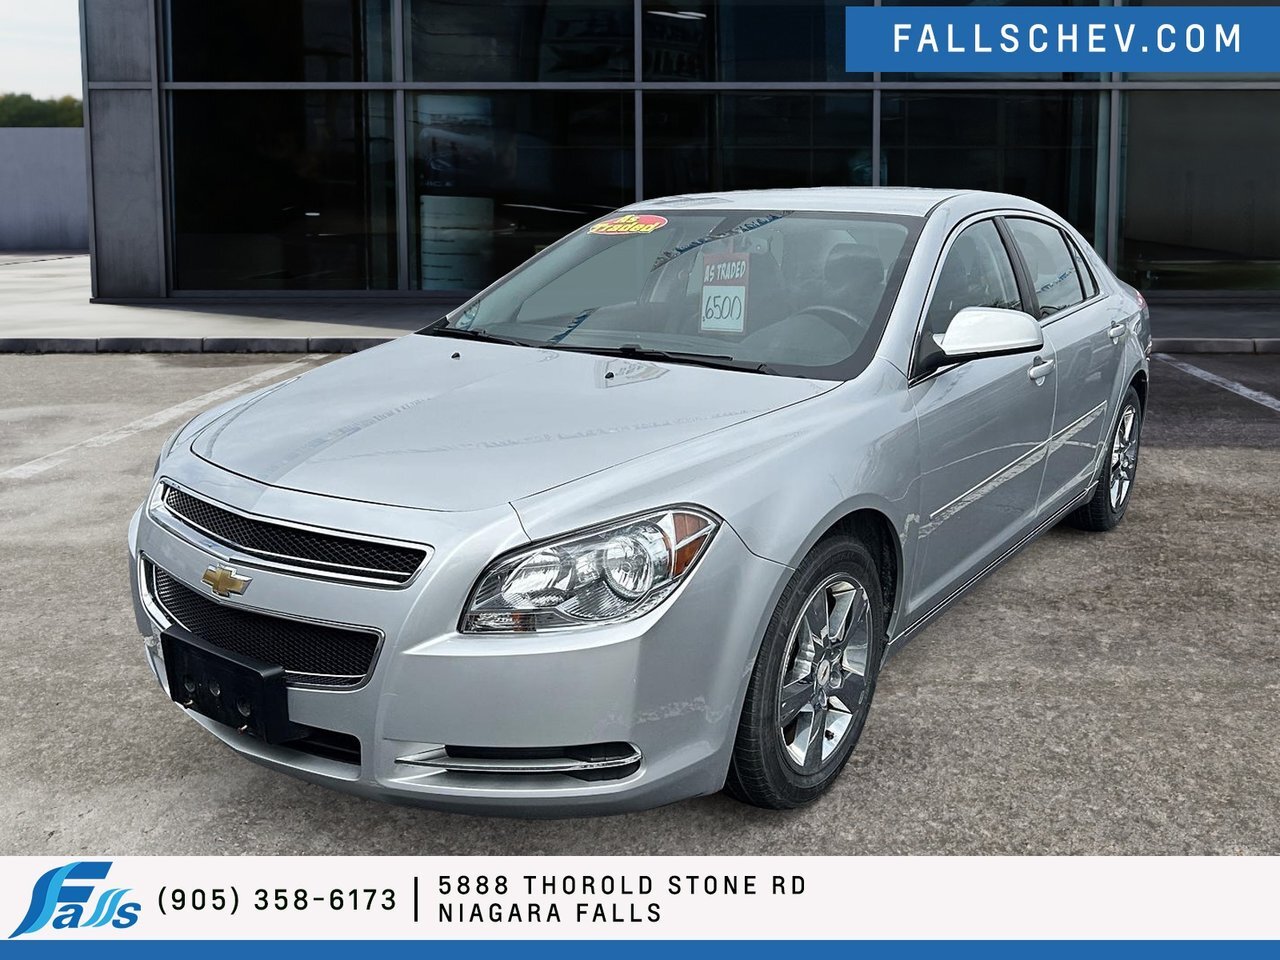 2011 Chevrolet Malibu LT Platinum Edition **VEHICLE BEING SOLD AS IS**